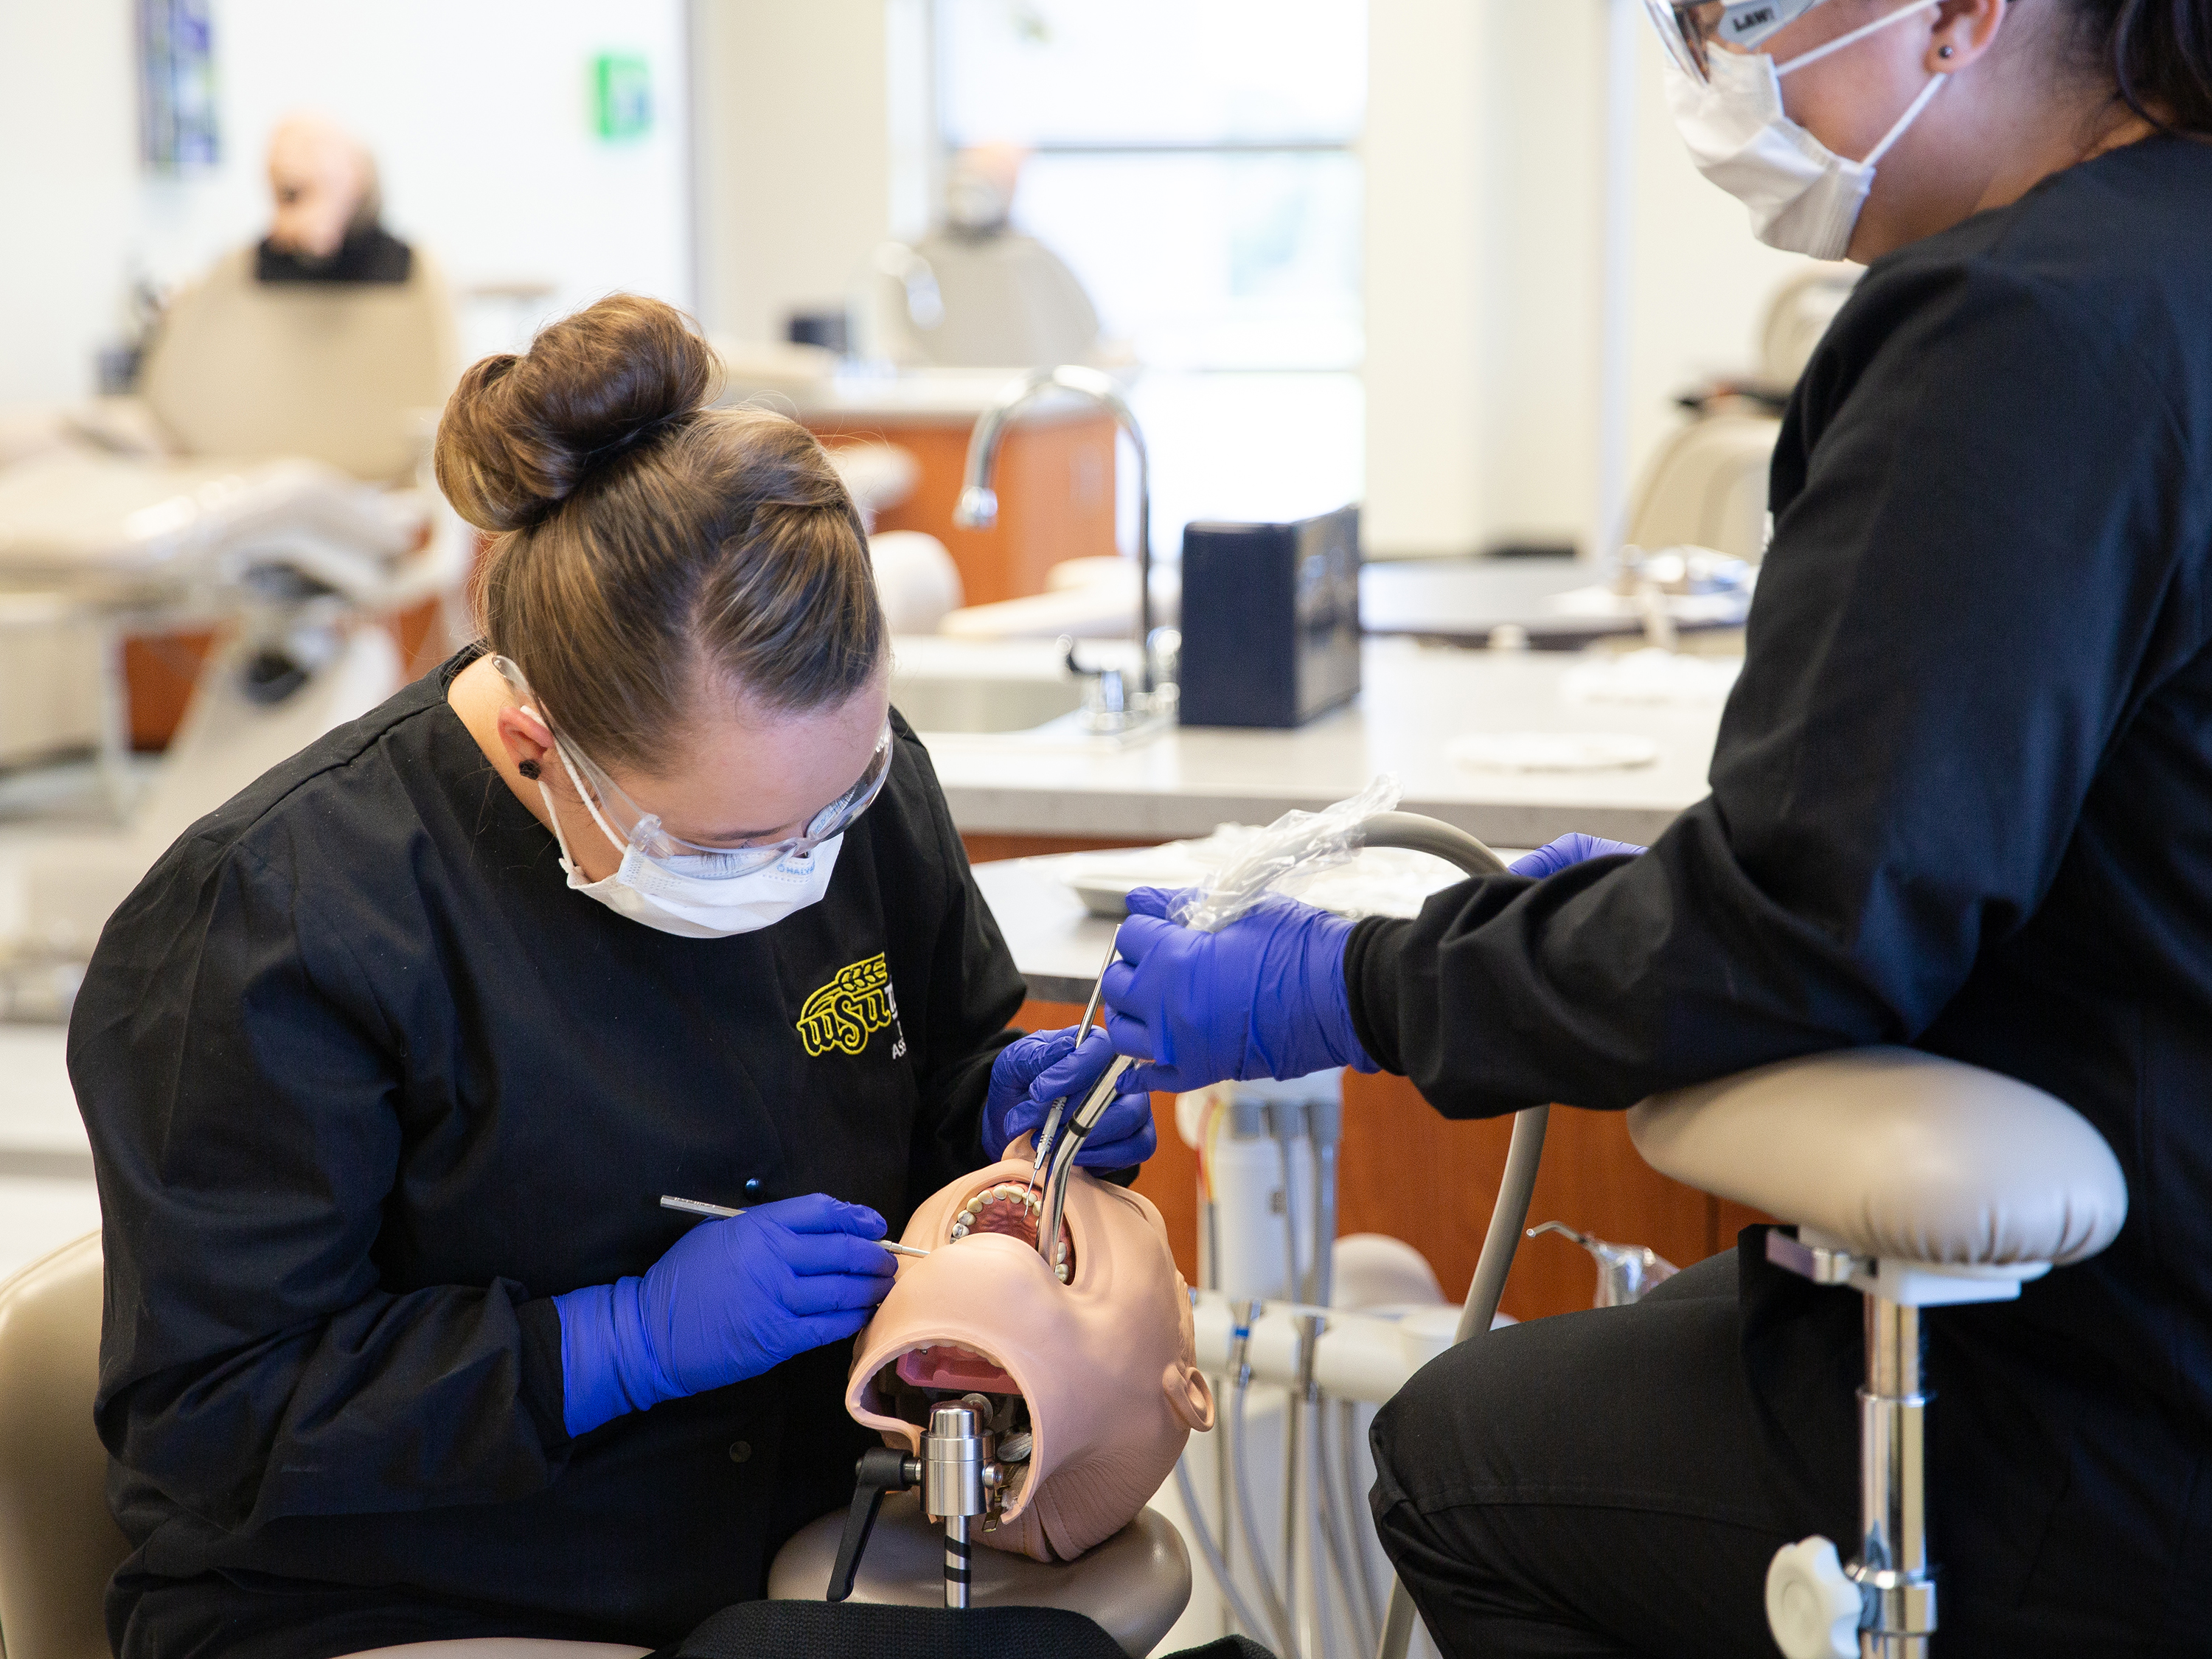 WSU Tech dental assistant students working on a mannequin